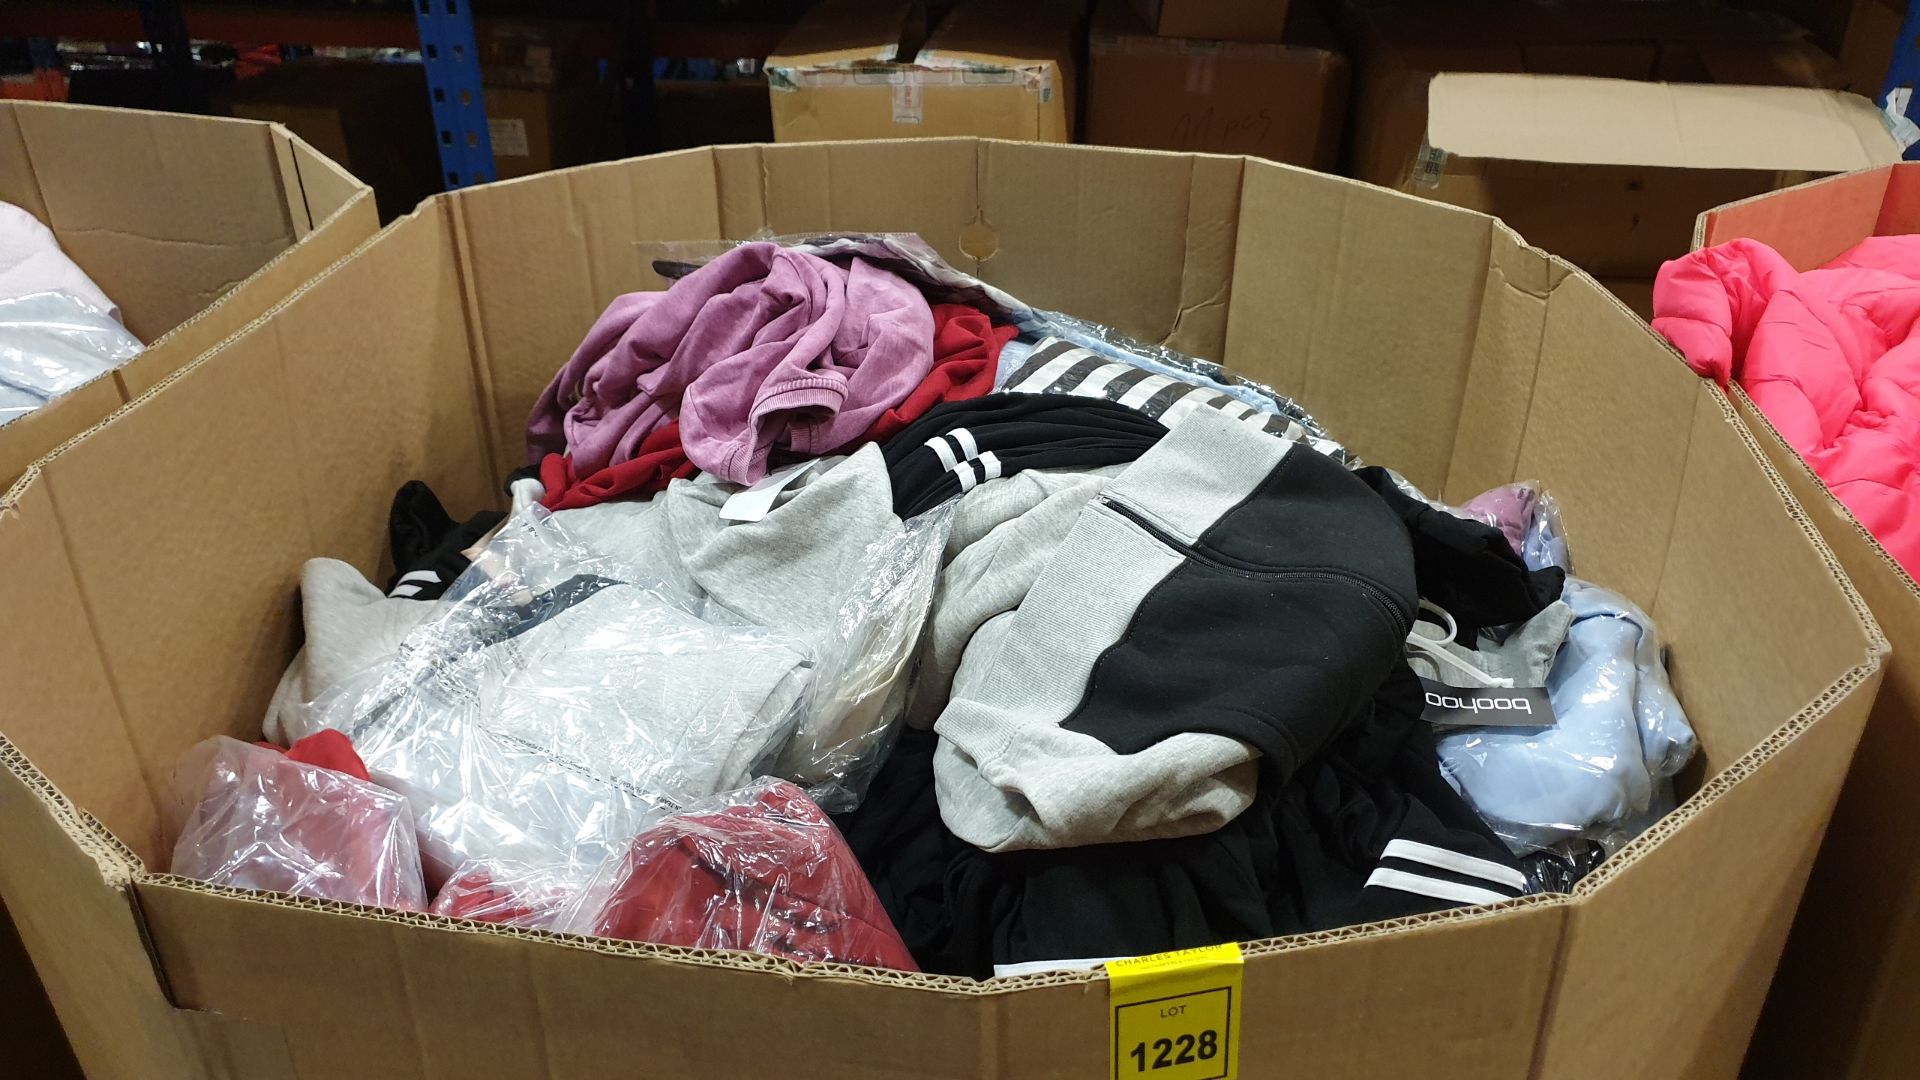 FULL PALLET OF CLOTHING IE BOOHOO JOGGERS, MFW (MY FASHION WORLD) HOODIES, ESSENTIALS COLLECTION